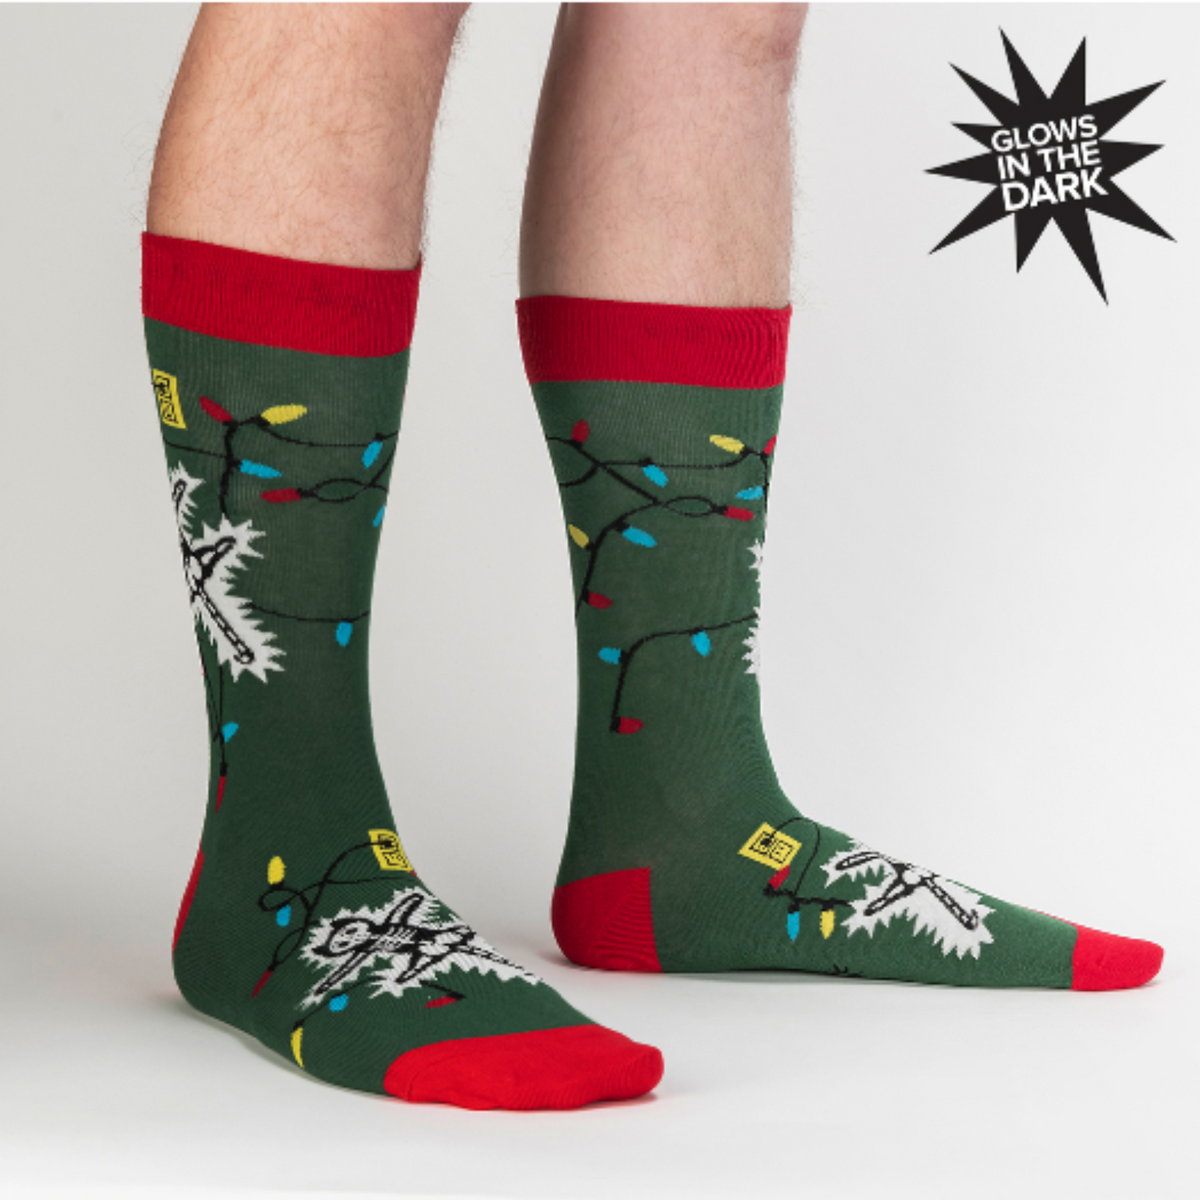 Sock It To Me Eating Light This Holiday (GLOWS IN THE DARK) women&#39;s and men&#39;s crew socks featuring green sock with red cuff, heel, and toe with cartoon cat being electrocuted by Christmas lights. Socks worn by male model seen from side. 